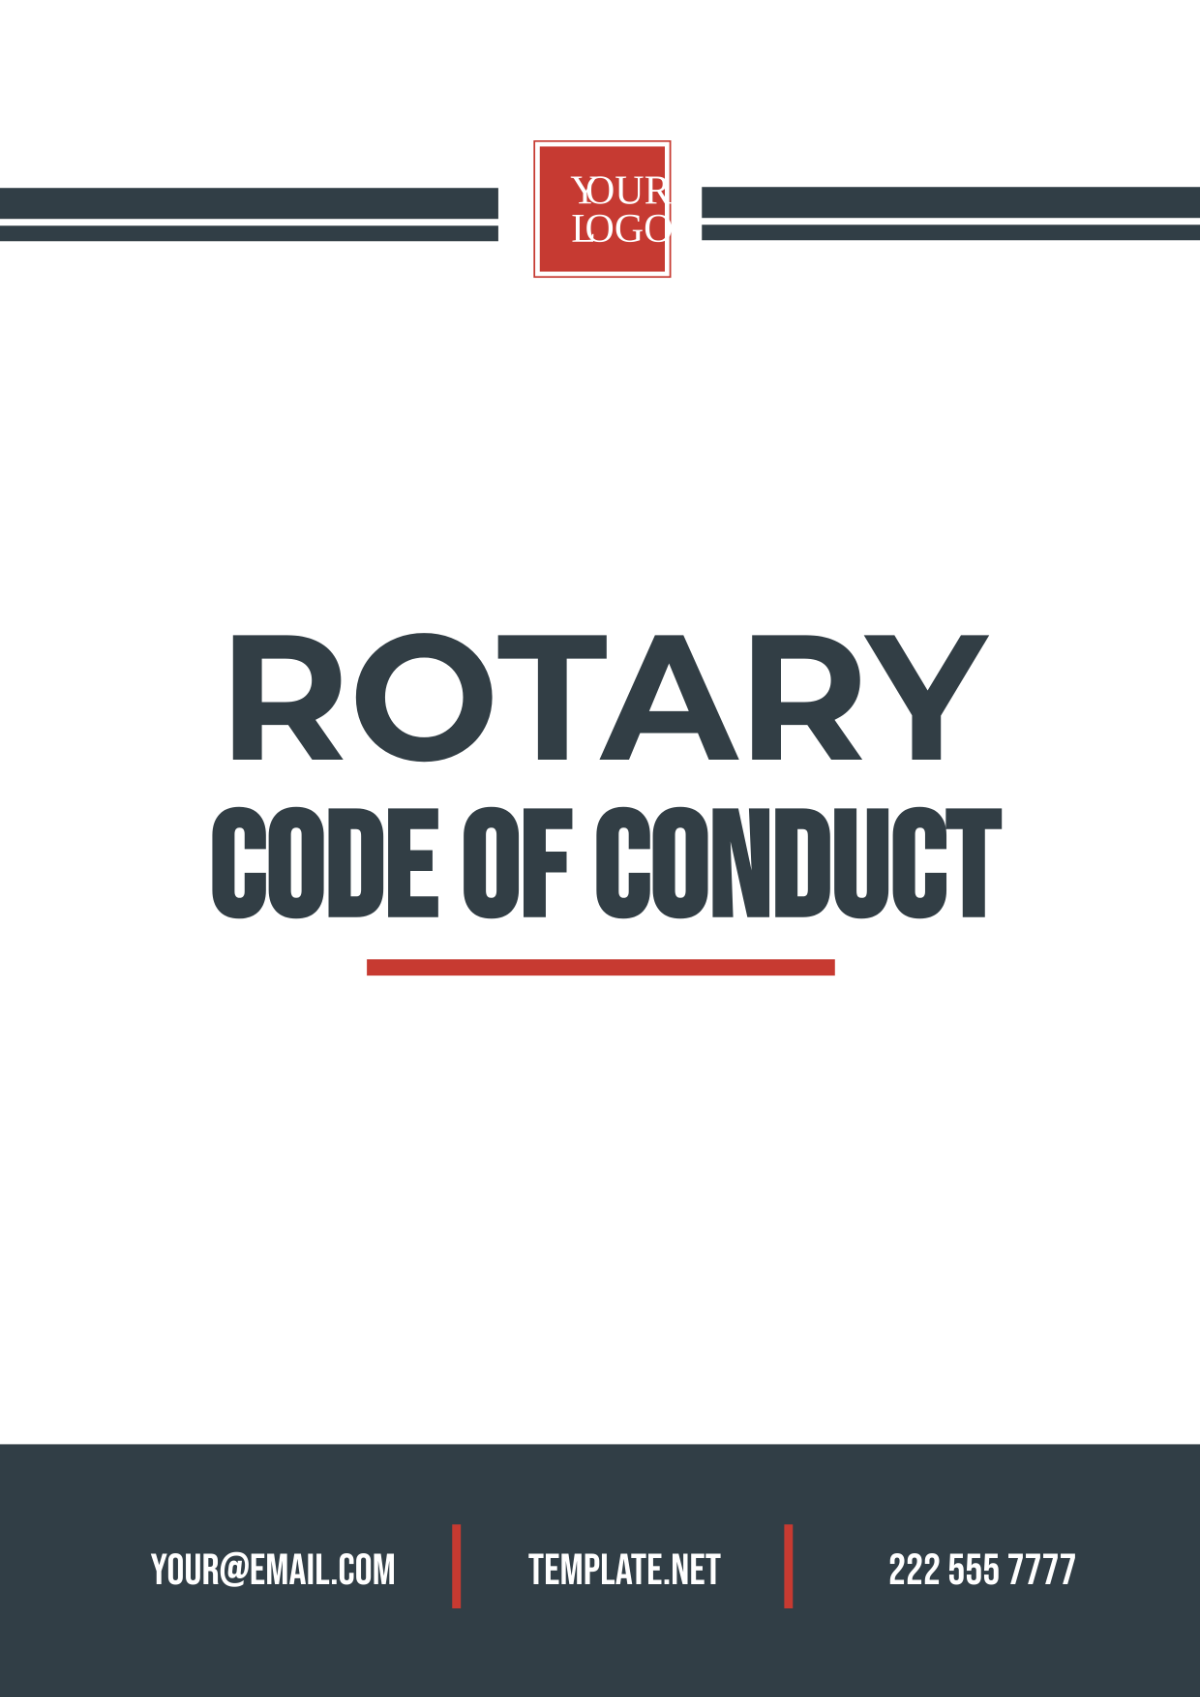 Free Rotary Code of Conduct Template